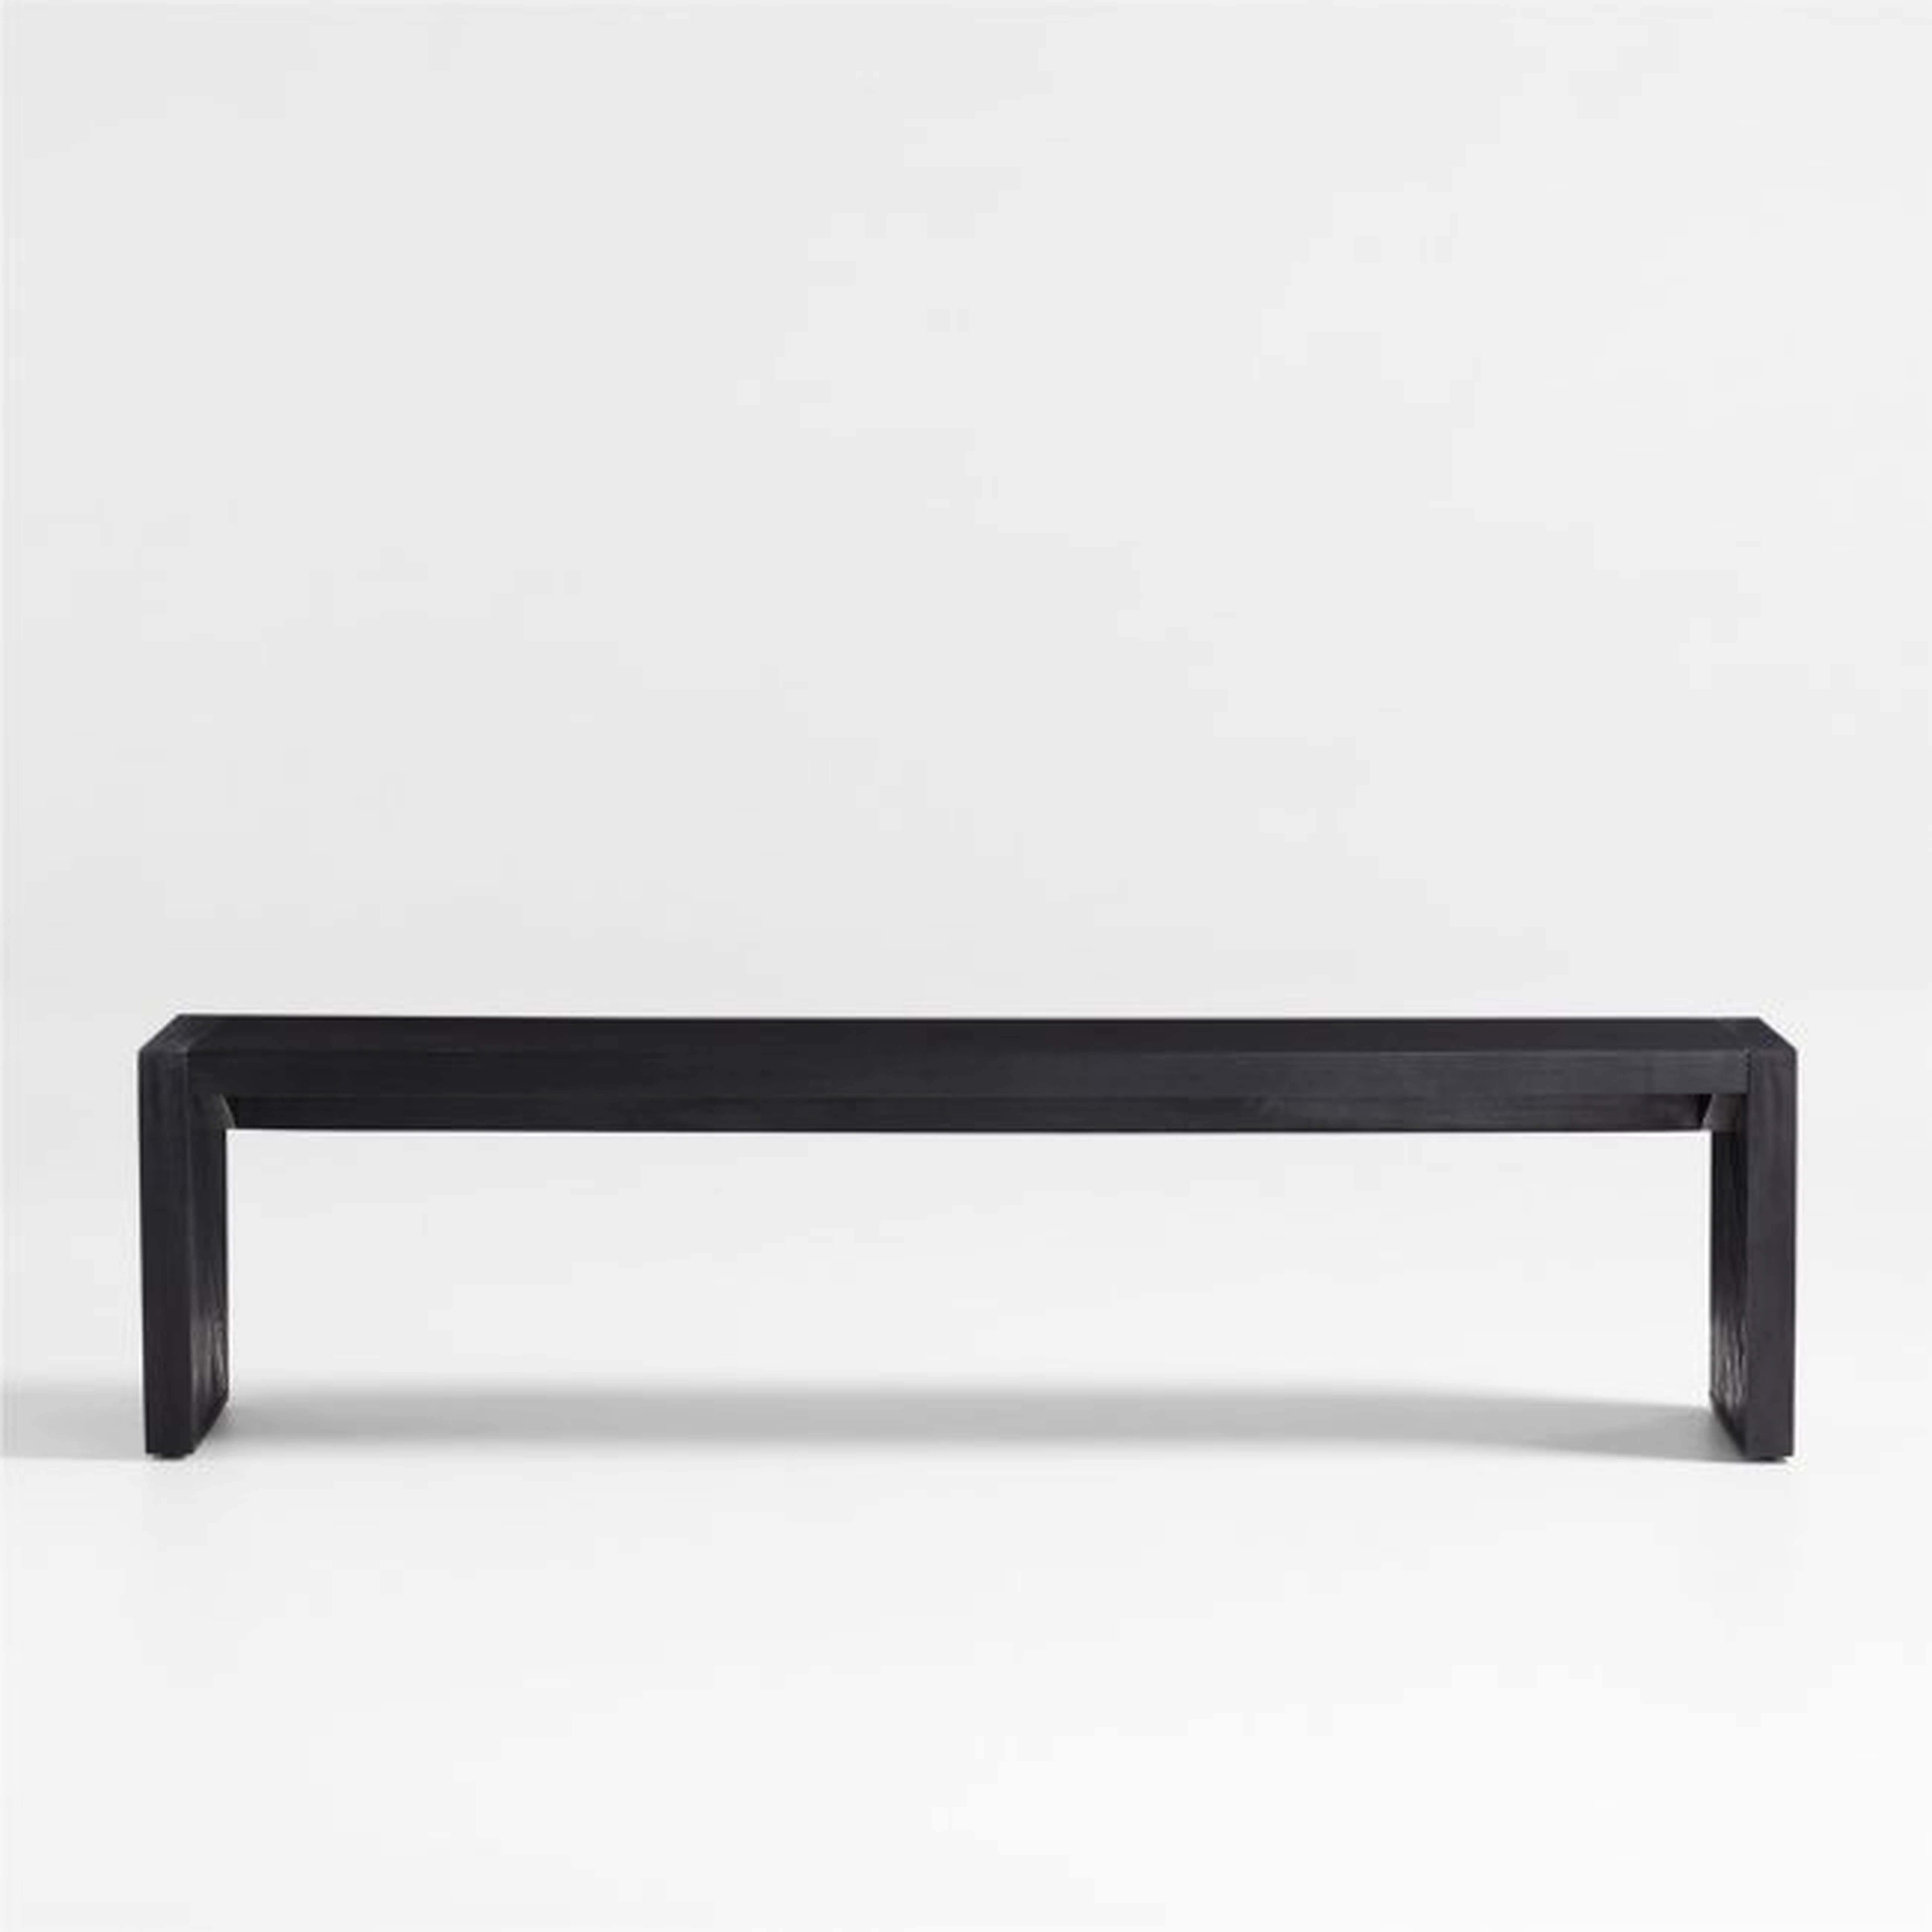 Dunewood 72" Charcoal Wood Dining Bench - Crate and Barrel